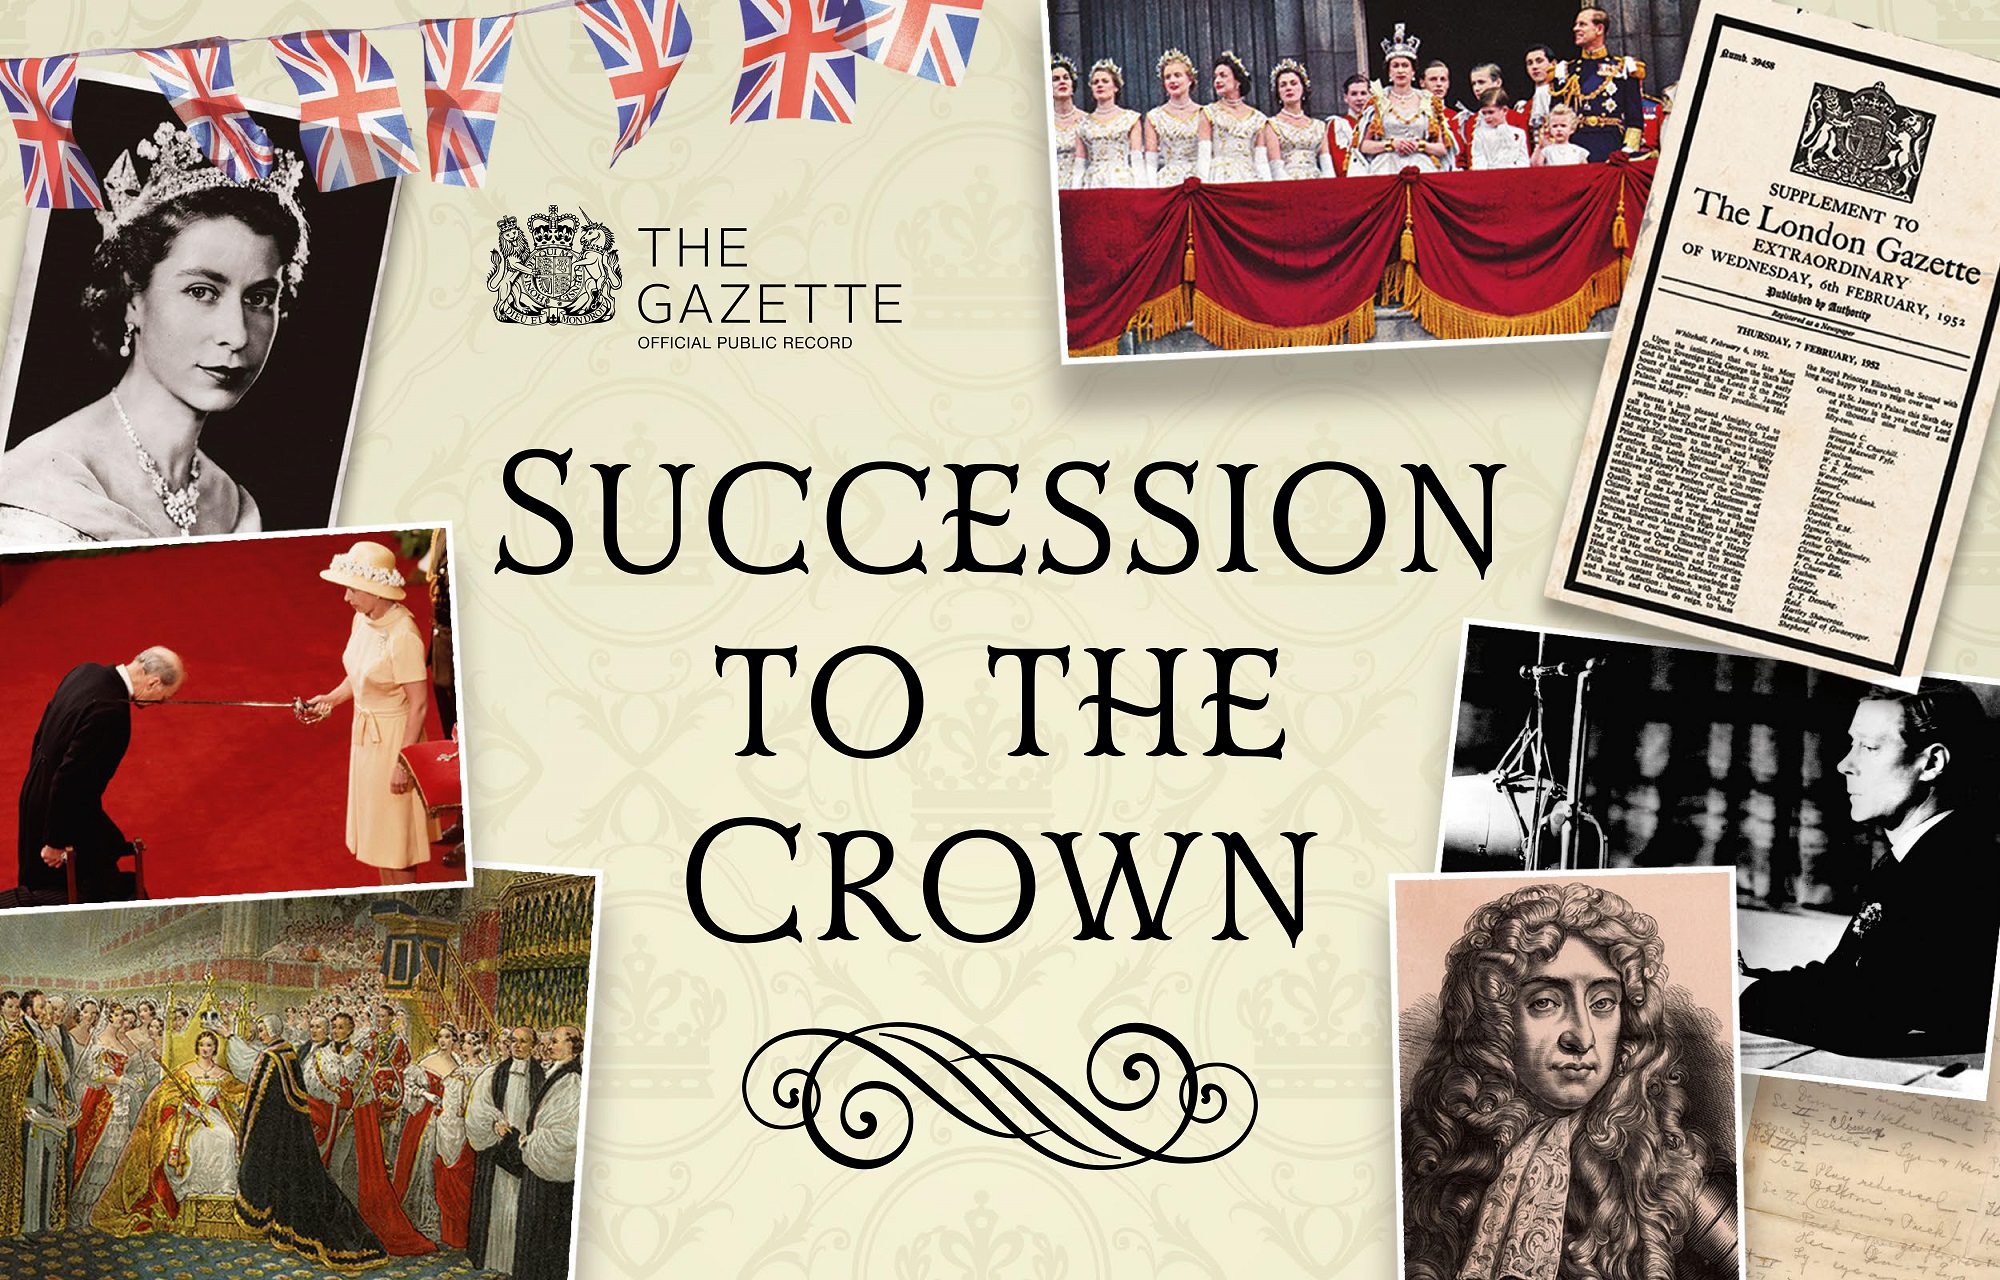 The Gazette Succession to the Crown